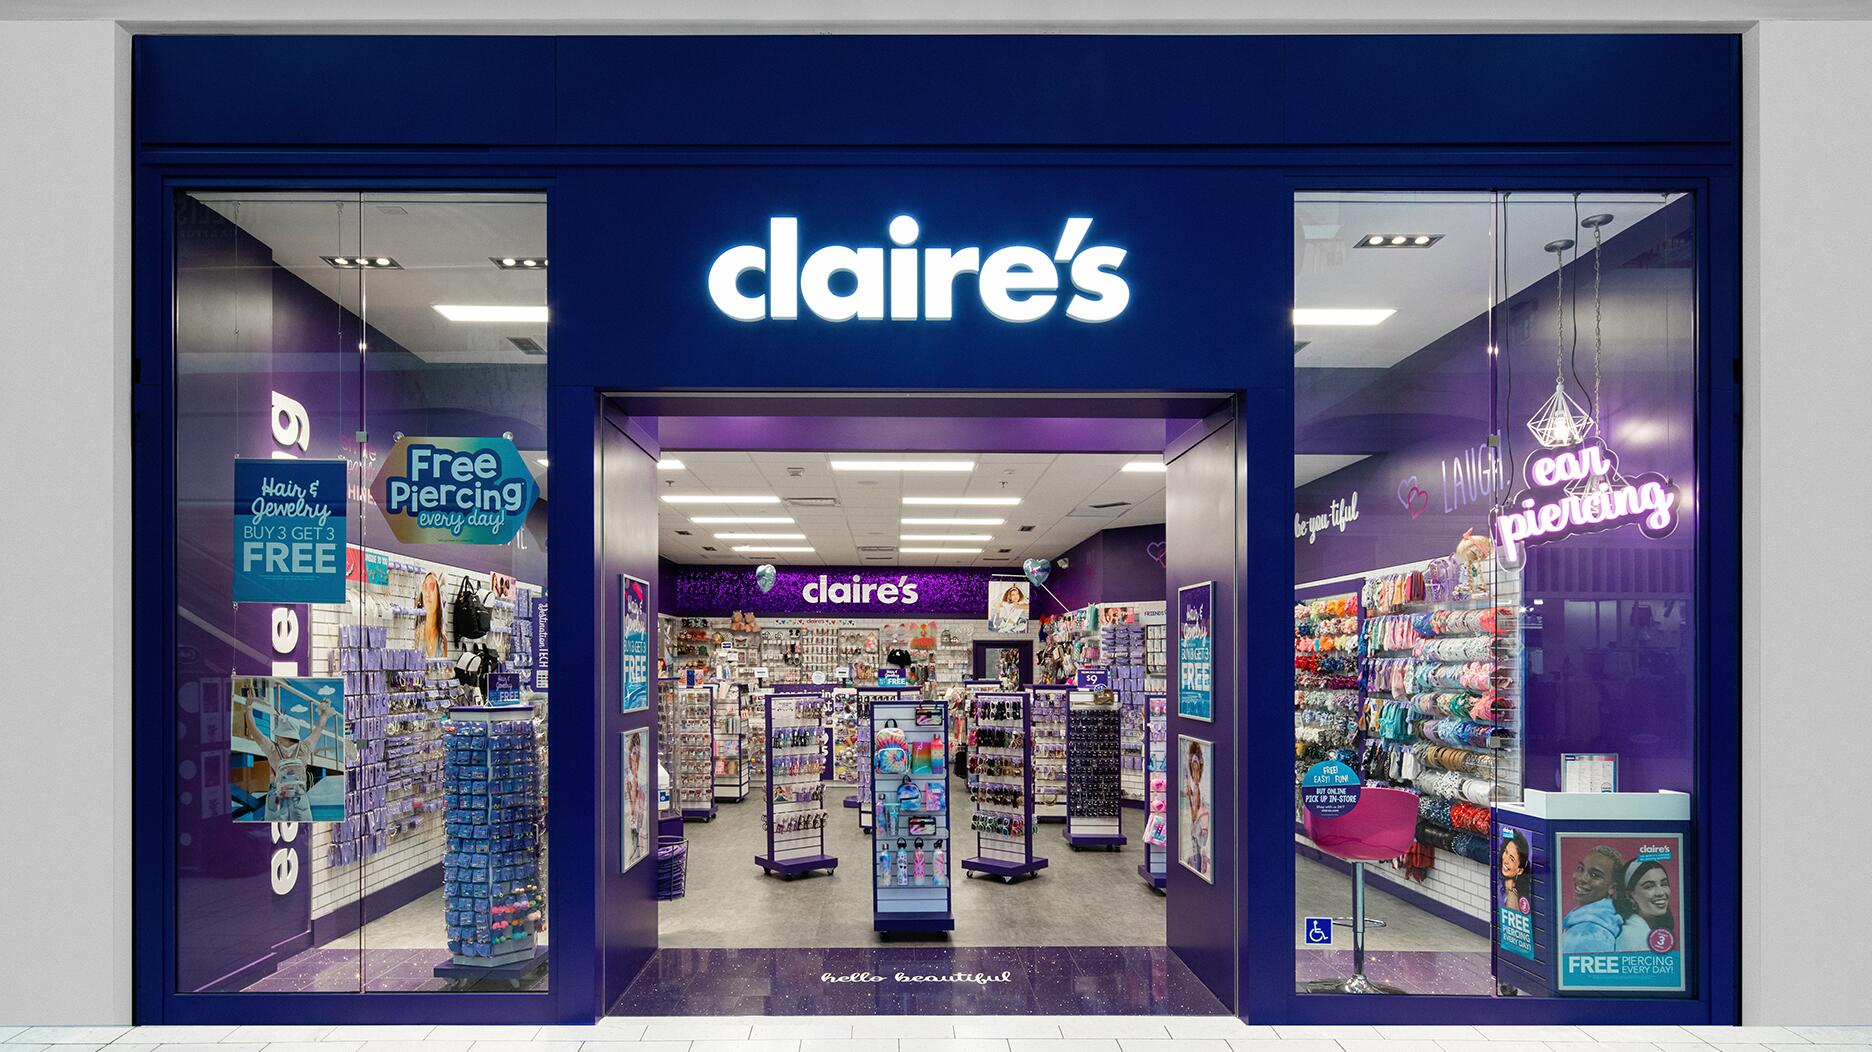 Claire's launches in-store partnership with Kohl's